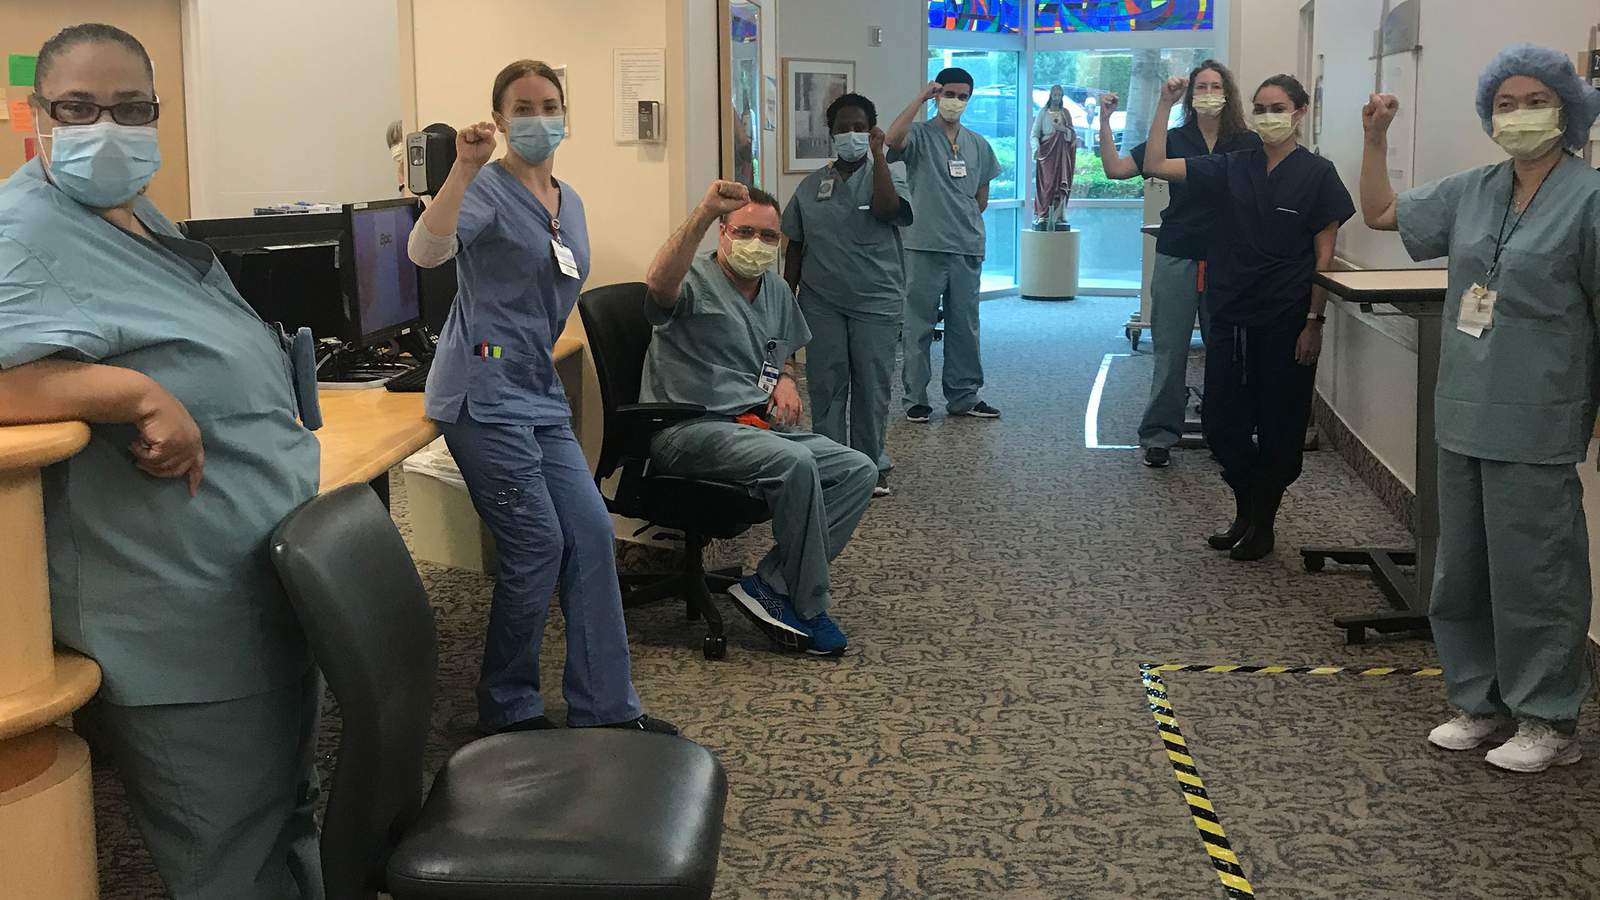 They were placed on leave for refusing to work without N95 masks. COVID-19 unit nurses are now back at work